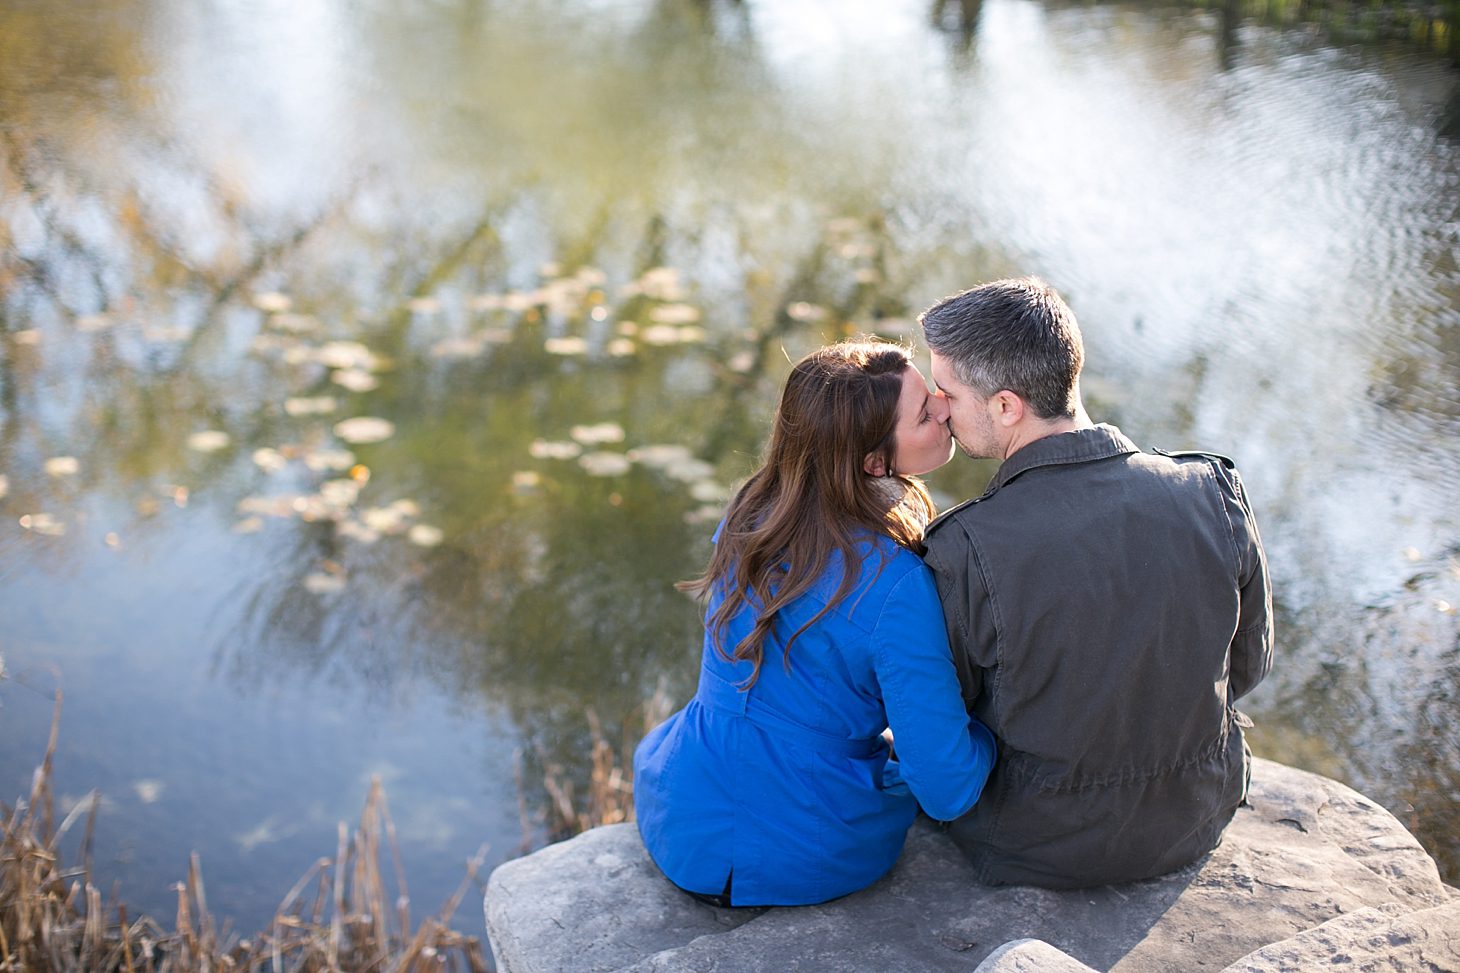 lily-pond-chicago-engagement-photos_0004